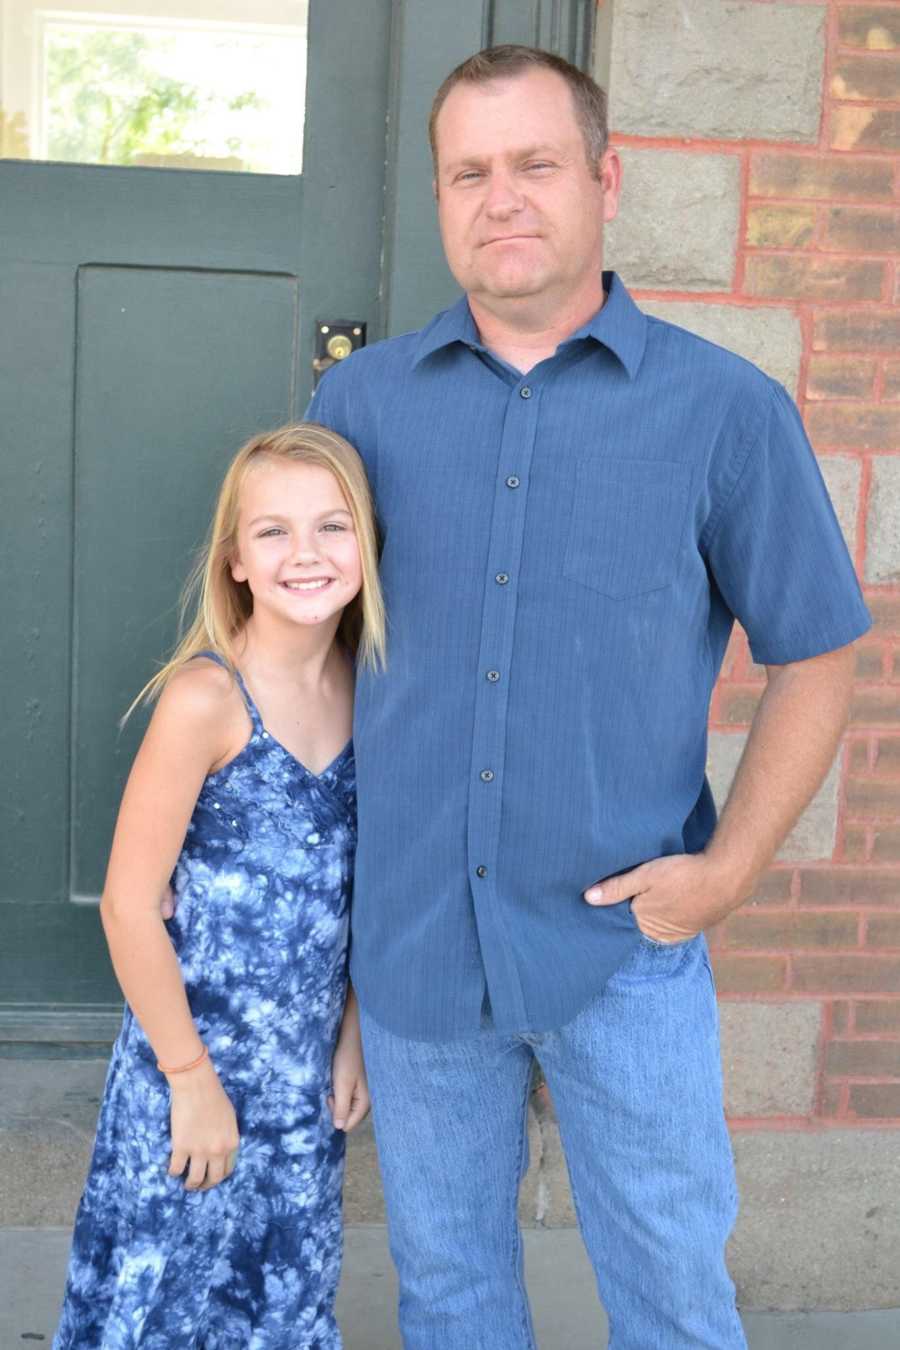 Young girl stands with her dad for a photo while they both wear blue